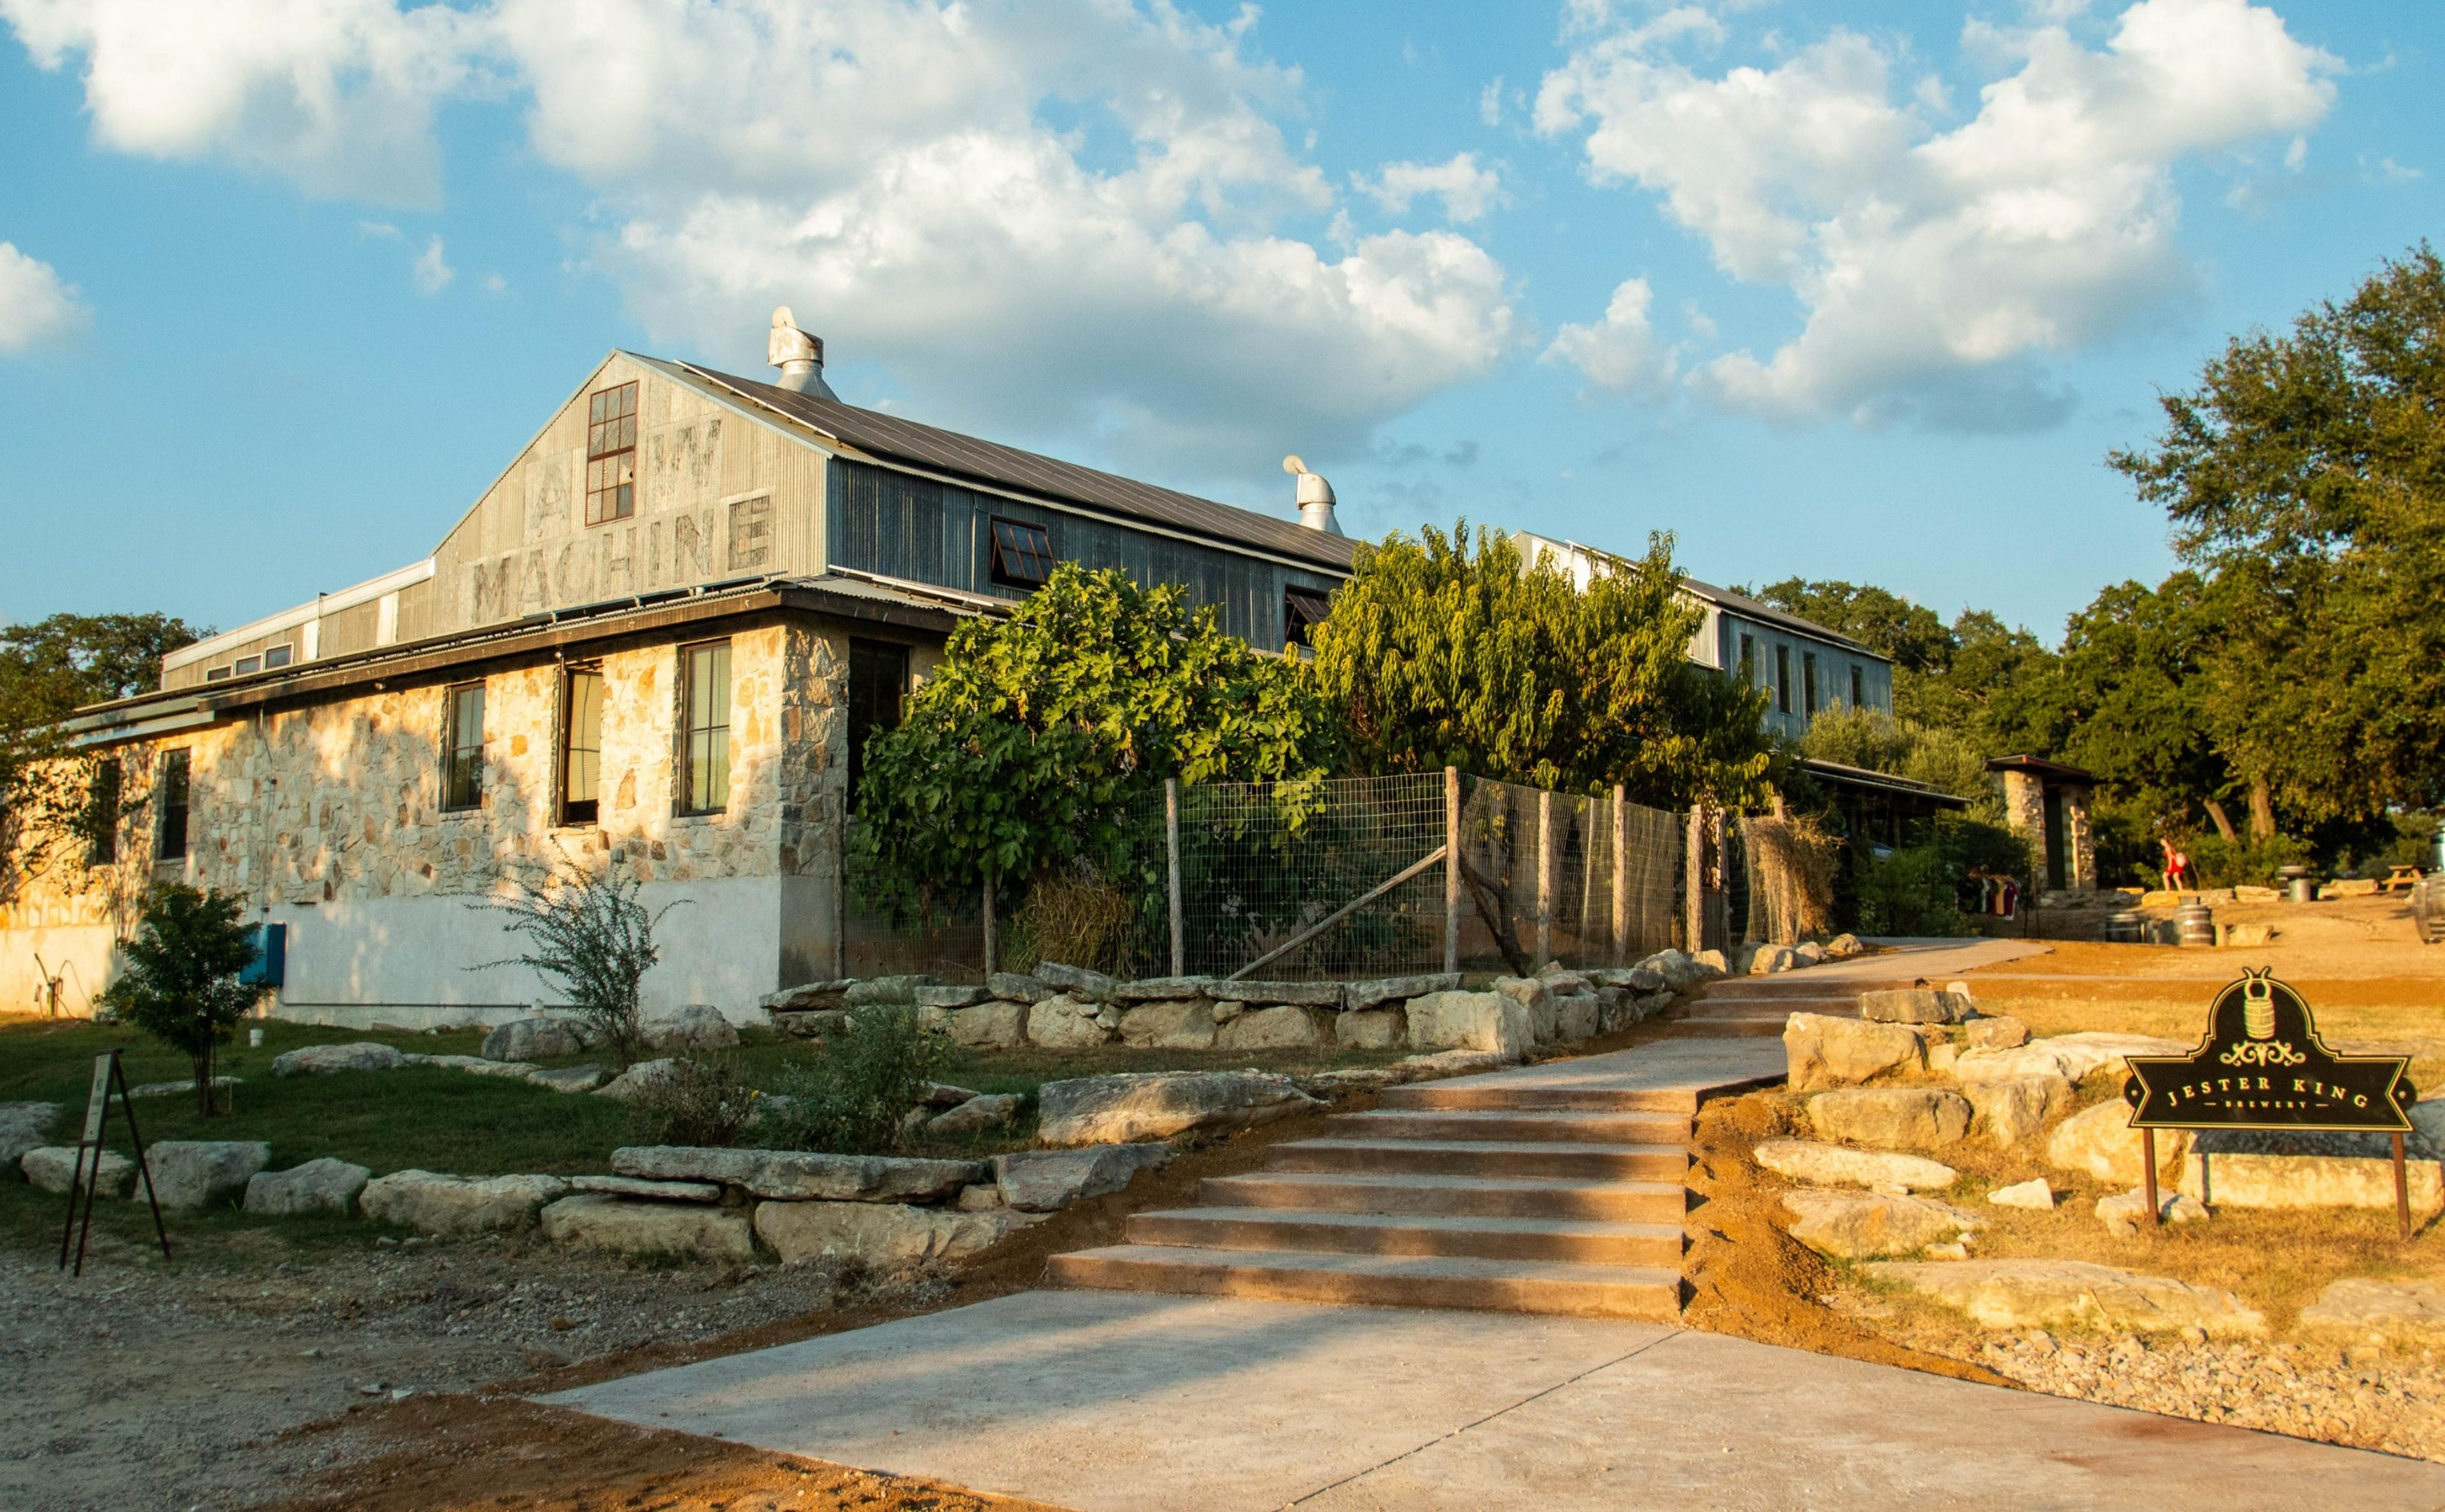 Jester King — Brewery, Kitchen, Farm & Event Hall